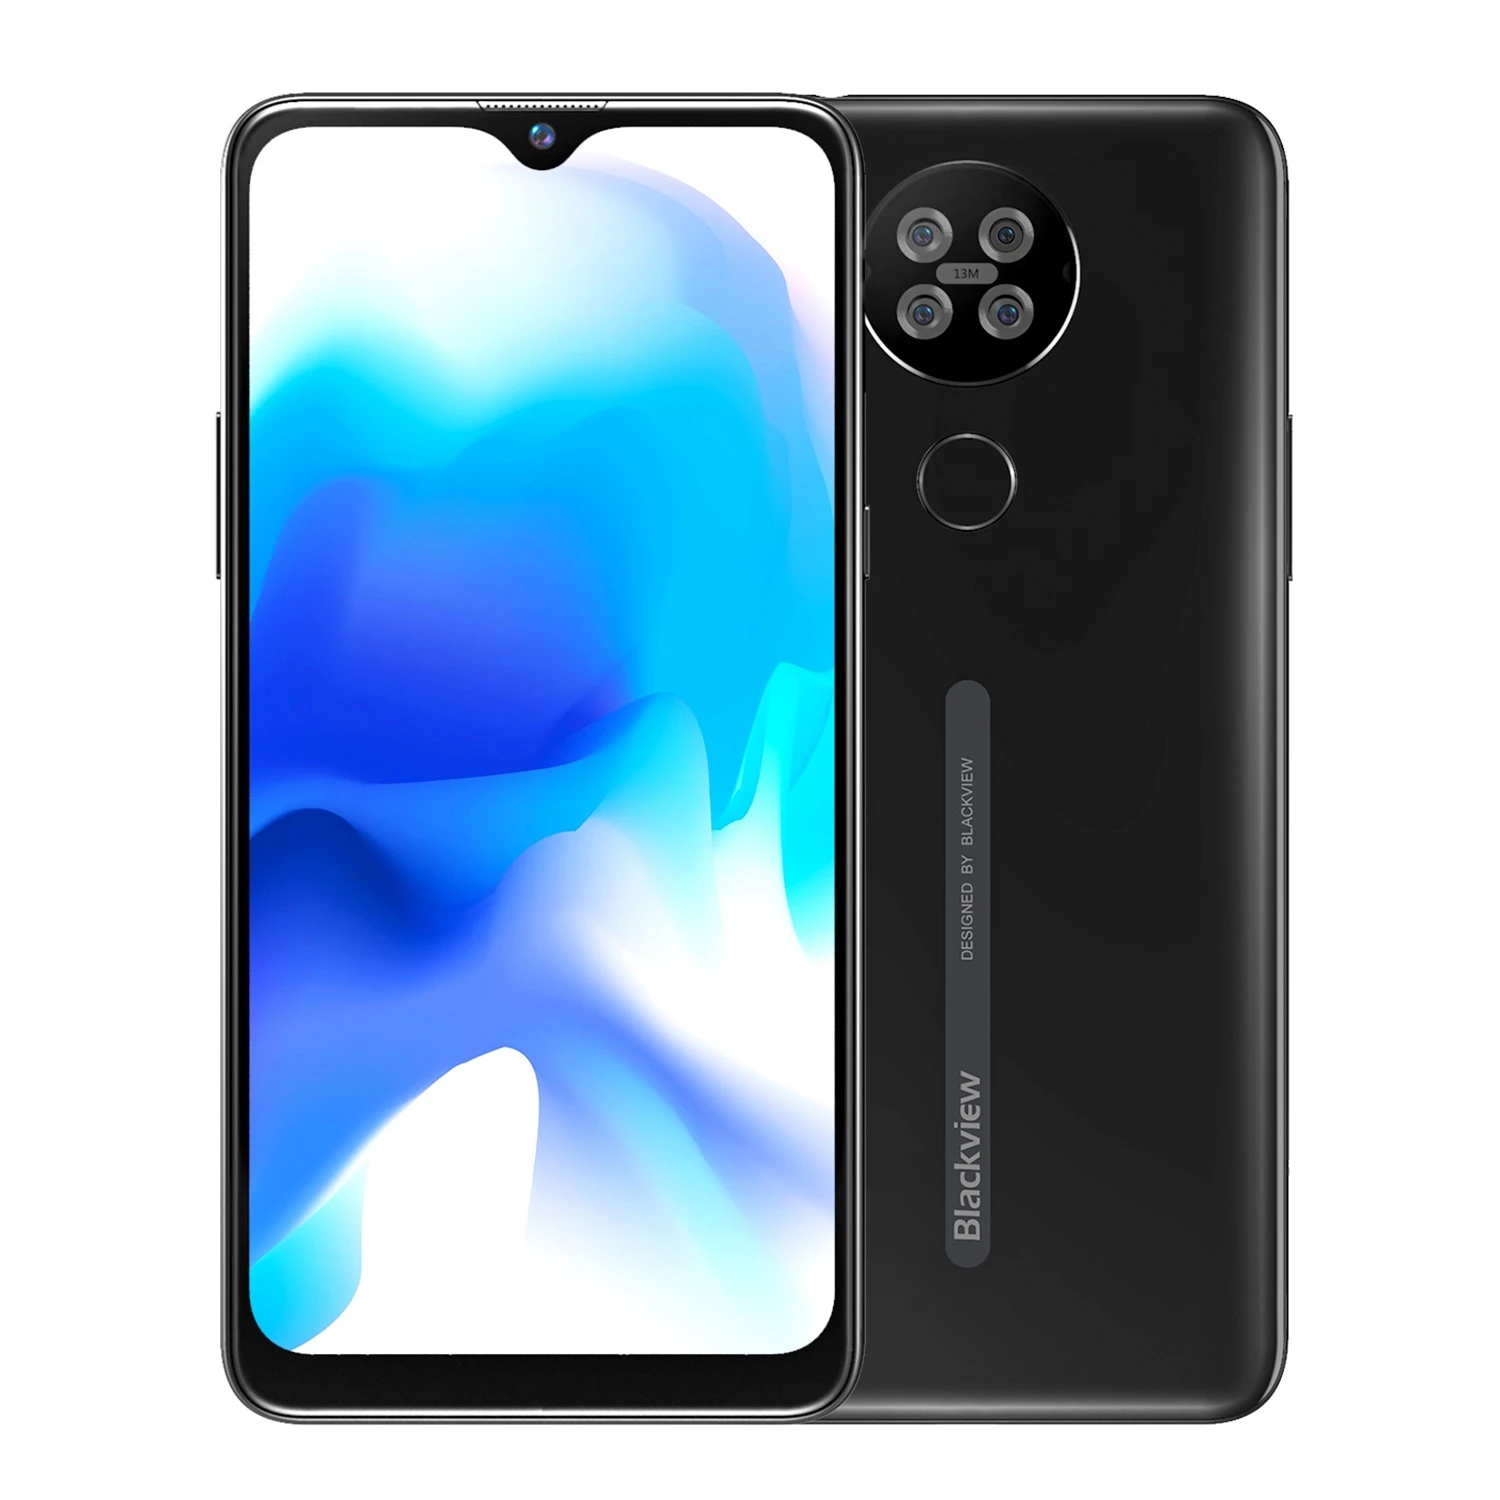 

New Cellulare Blackview A80S 4GB 64GB Face ID Fingerprint Identification 4200mAh Battery 6.21 inch Android 10.0 4G Telefono